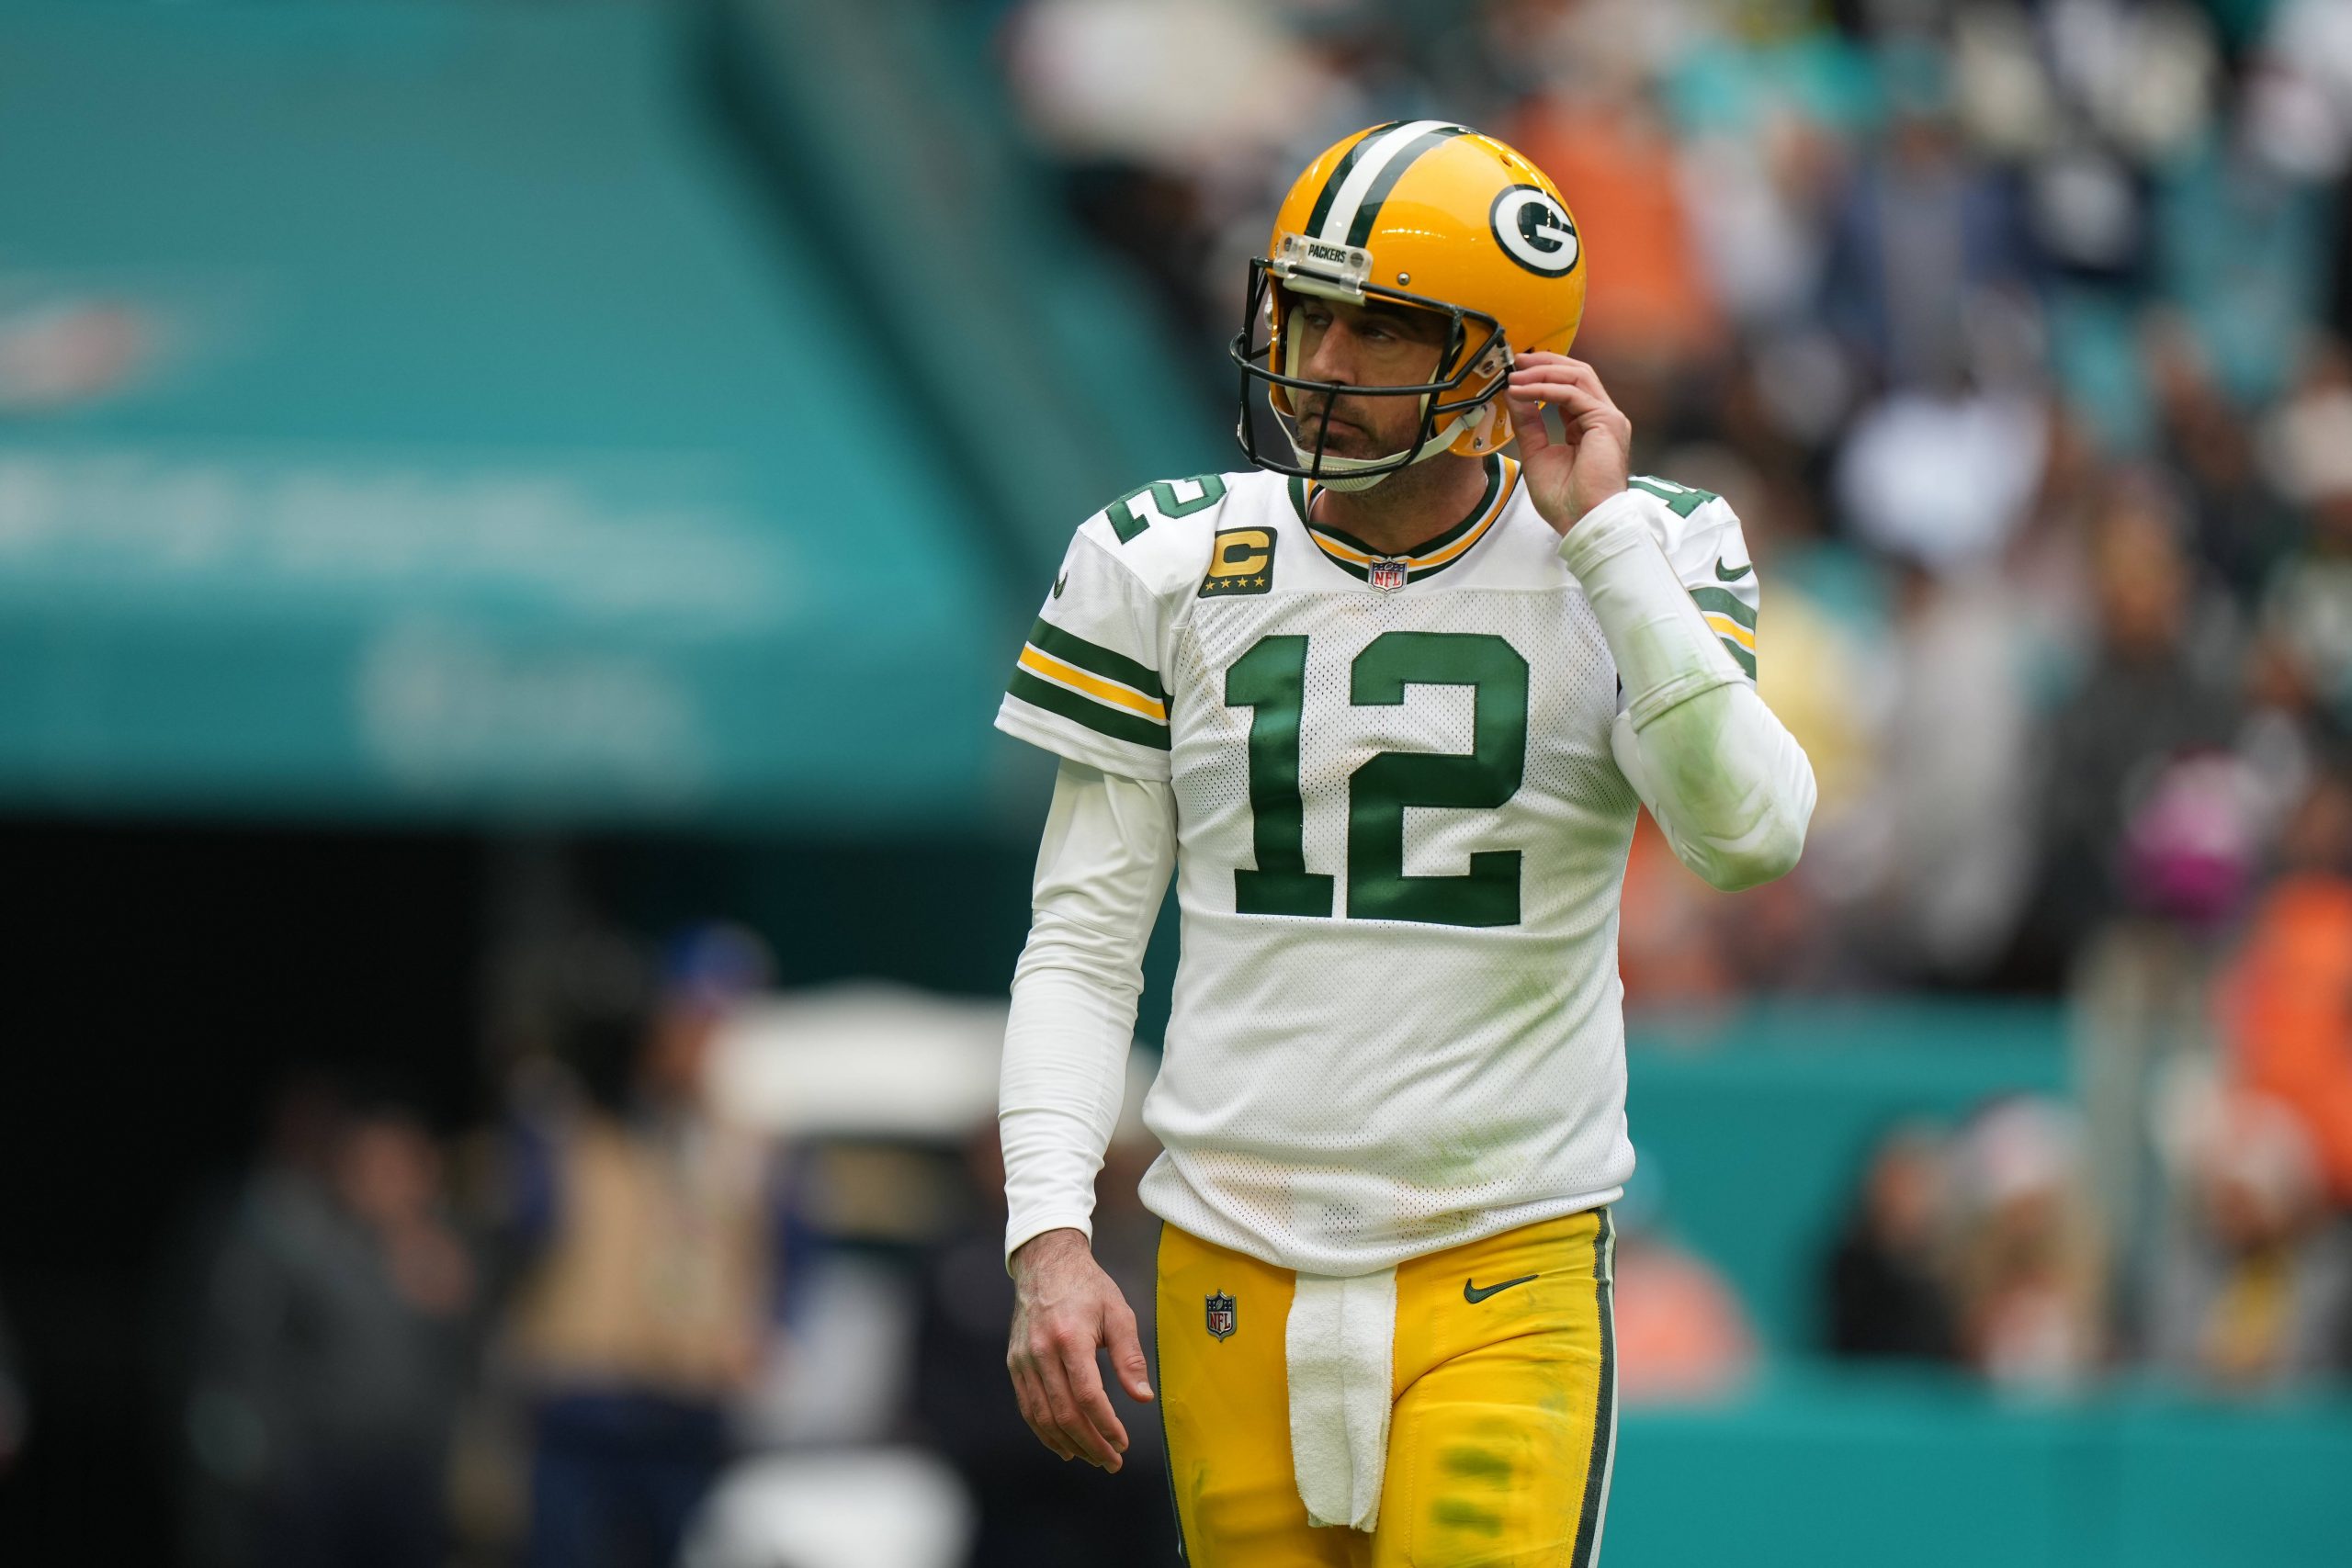 Aaron Rodgers - MIAMI GARDENS, FL - DECEMBER 25: Green Bay Packers quarterback Aaron Rodgers 12 shows his frustration during the game between the Green Bay Packers and the Miami Dolphins on Sunday, December 25, 2022 at Hard Rock Stadium, Miami Gardens, Fla. Photo by Peter Joneleit/Icon Sportswire NFL, American Football Herren, USA DEC 25 Packers at Dolphins Icon221225099